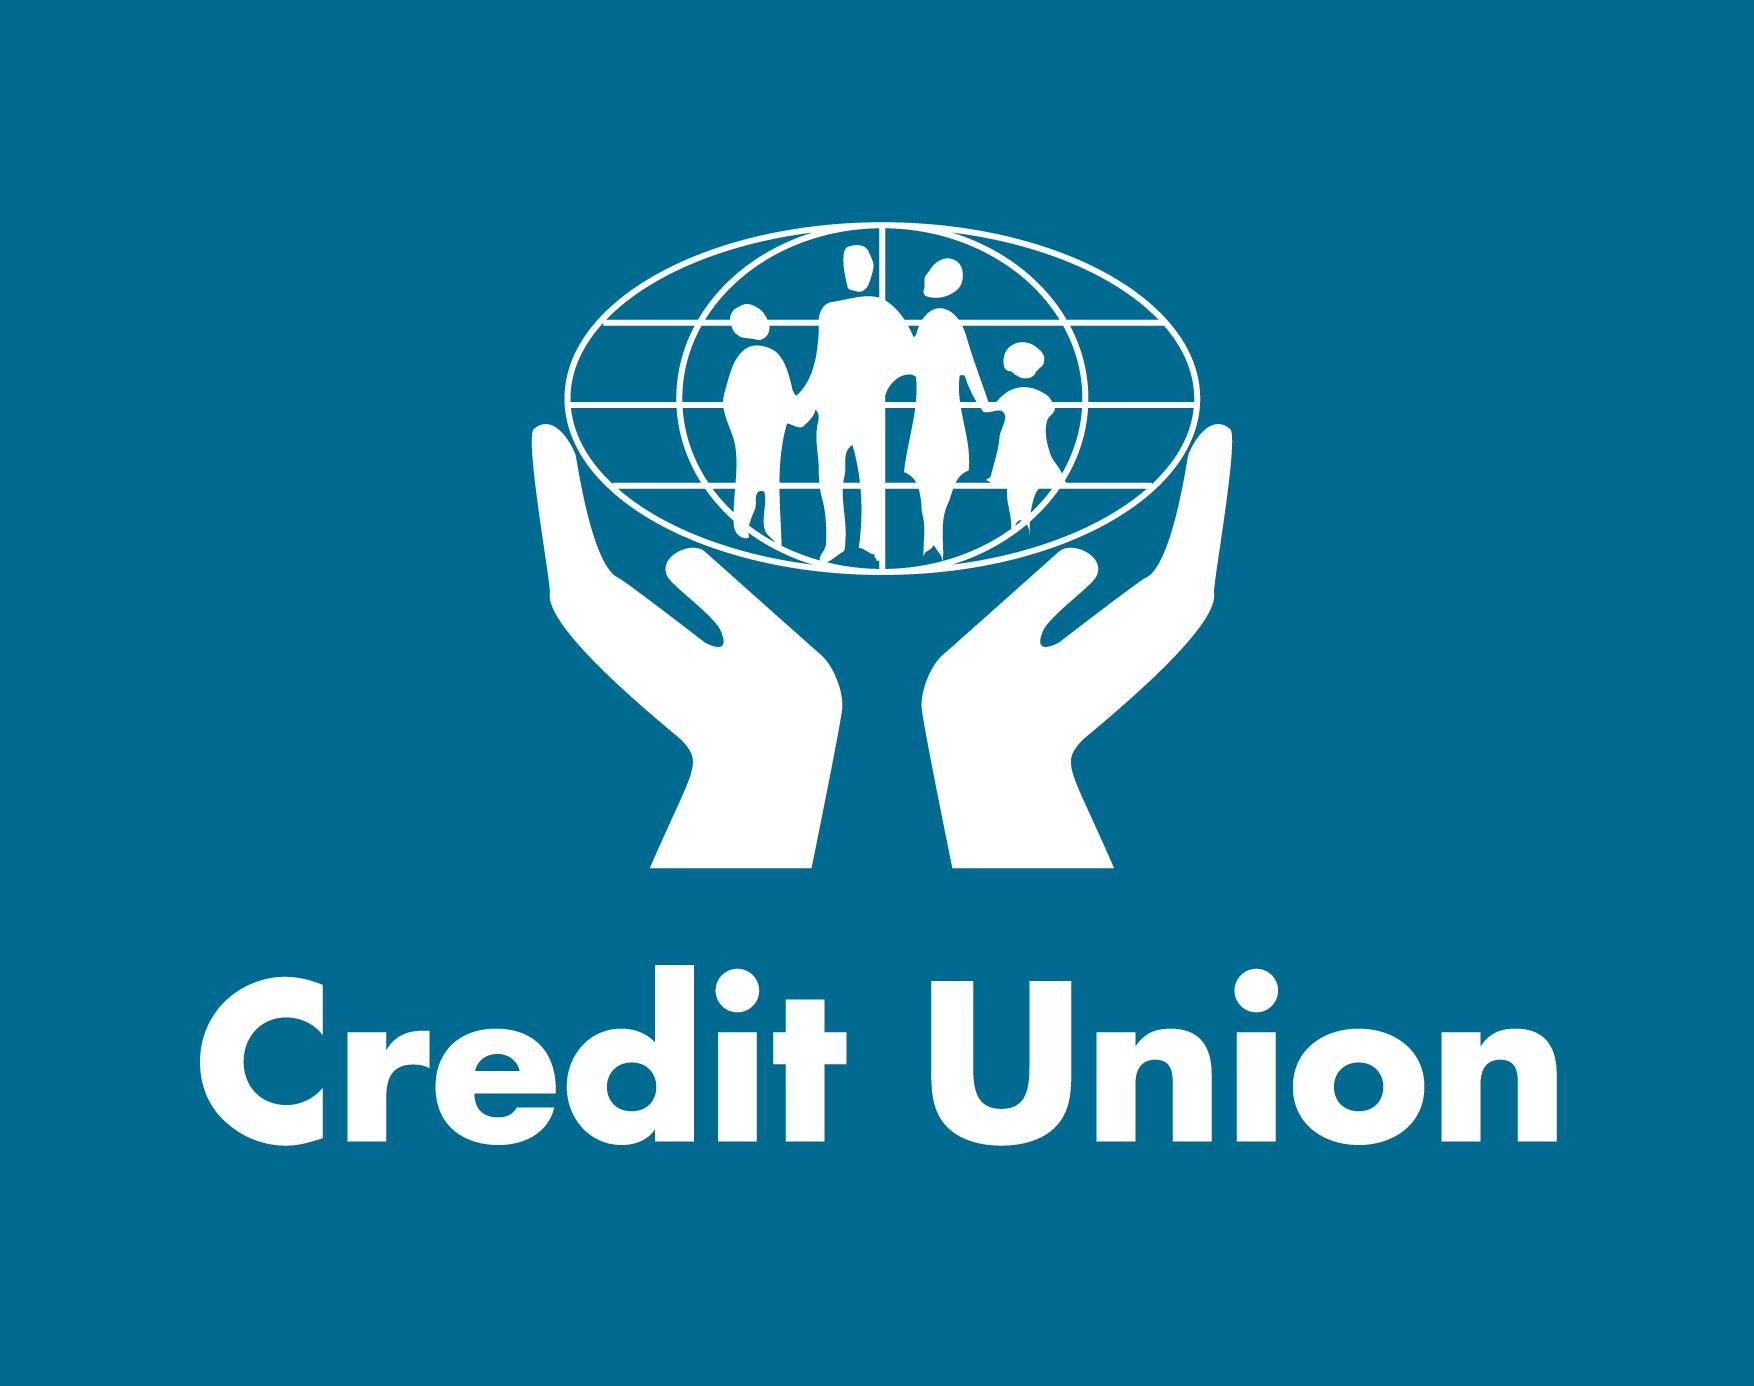 Credit Union Logo - Credit Union logo PMS Credit Union Limited